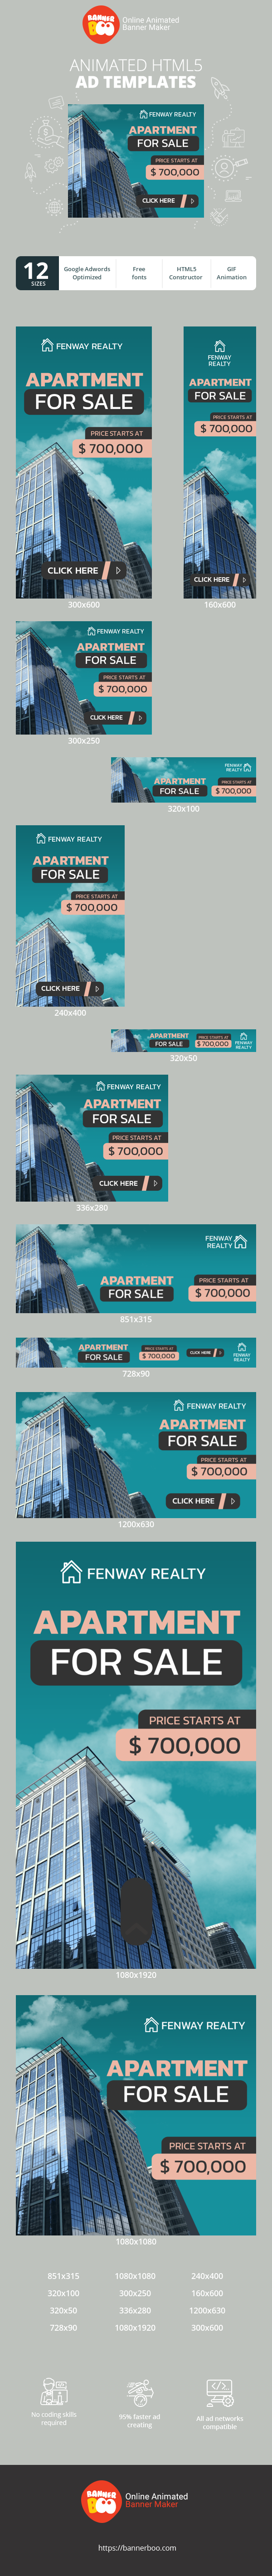 Banner ad template — Apartment For Sale — Price Starts At $ 700,000